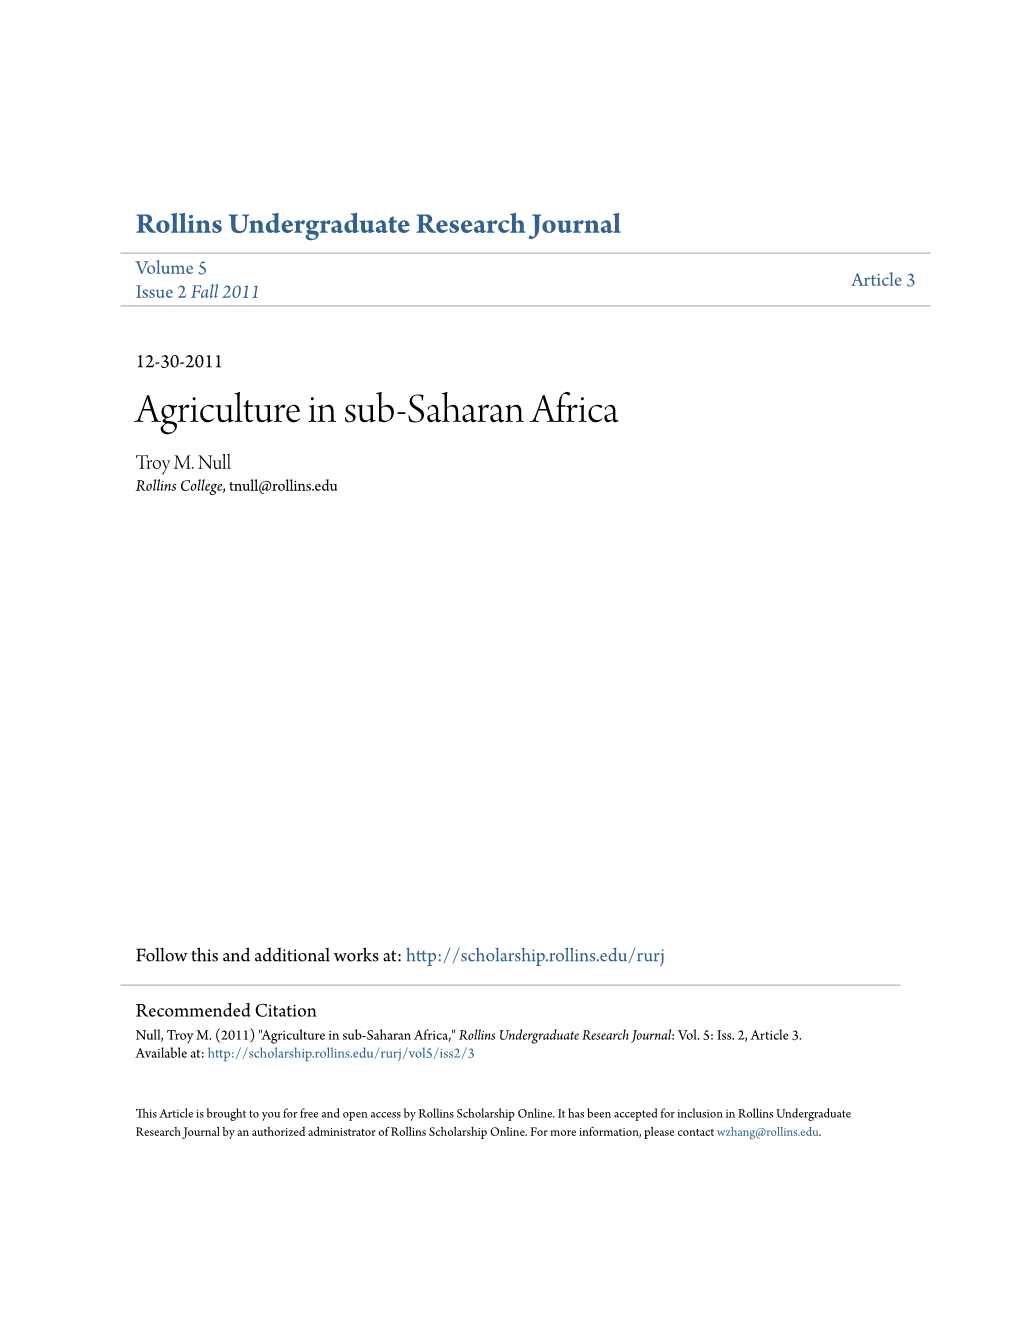 Agriculture in Sub-Saharan Africa Troy M